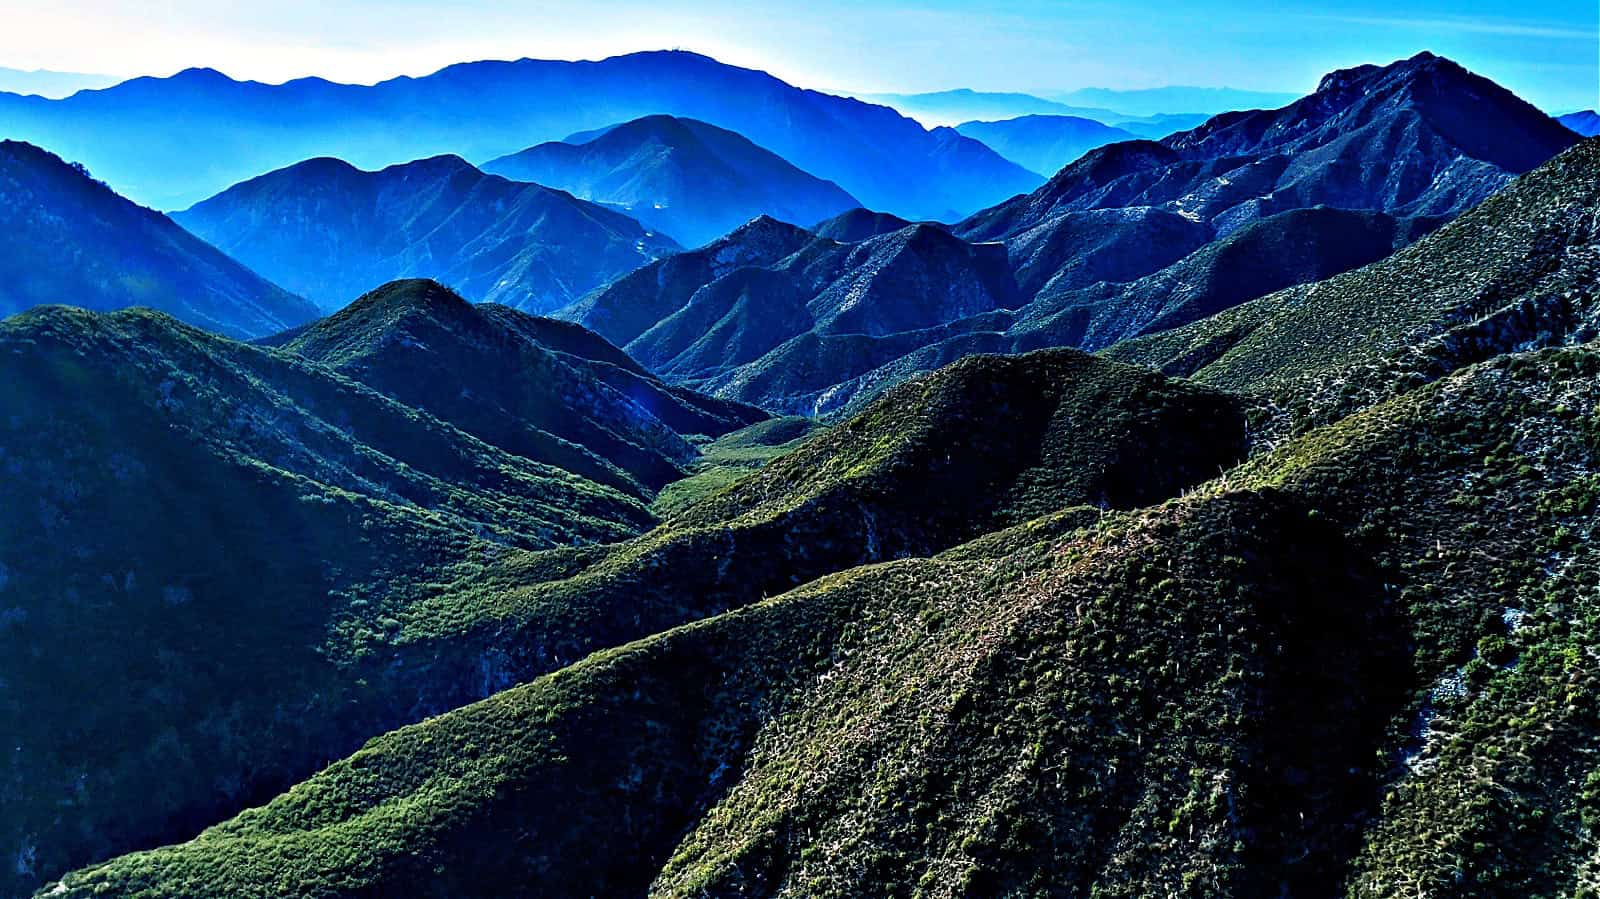 San Gabriel Mountains from Strawberry Peak Trail, Angeles National Forest, California